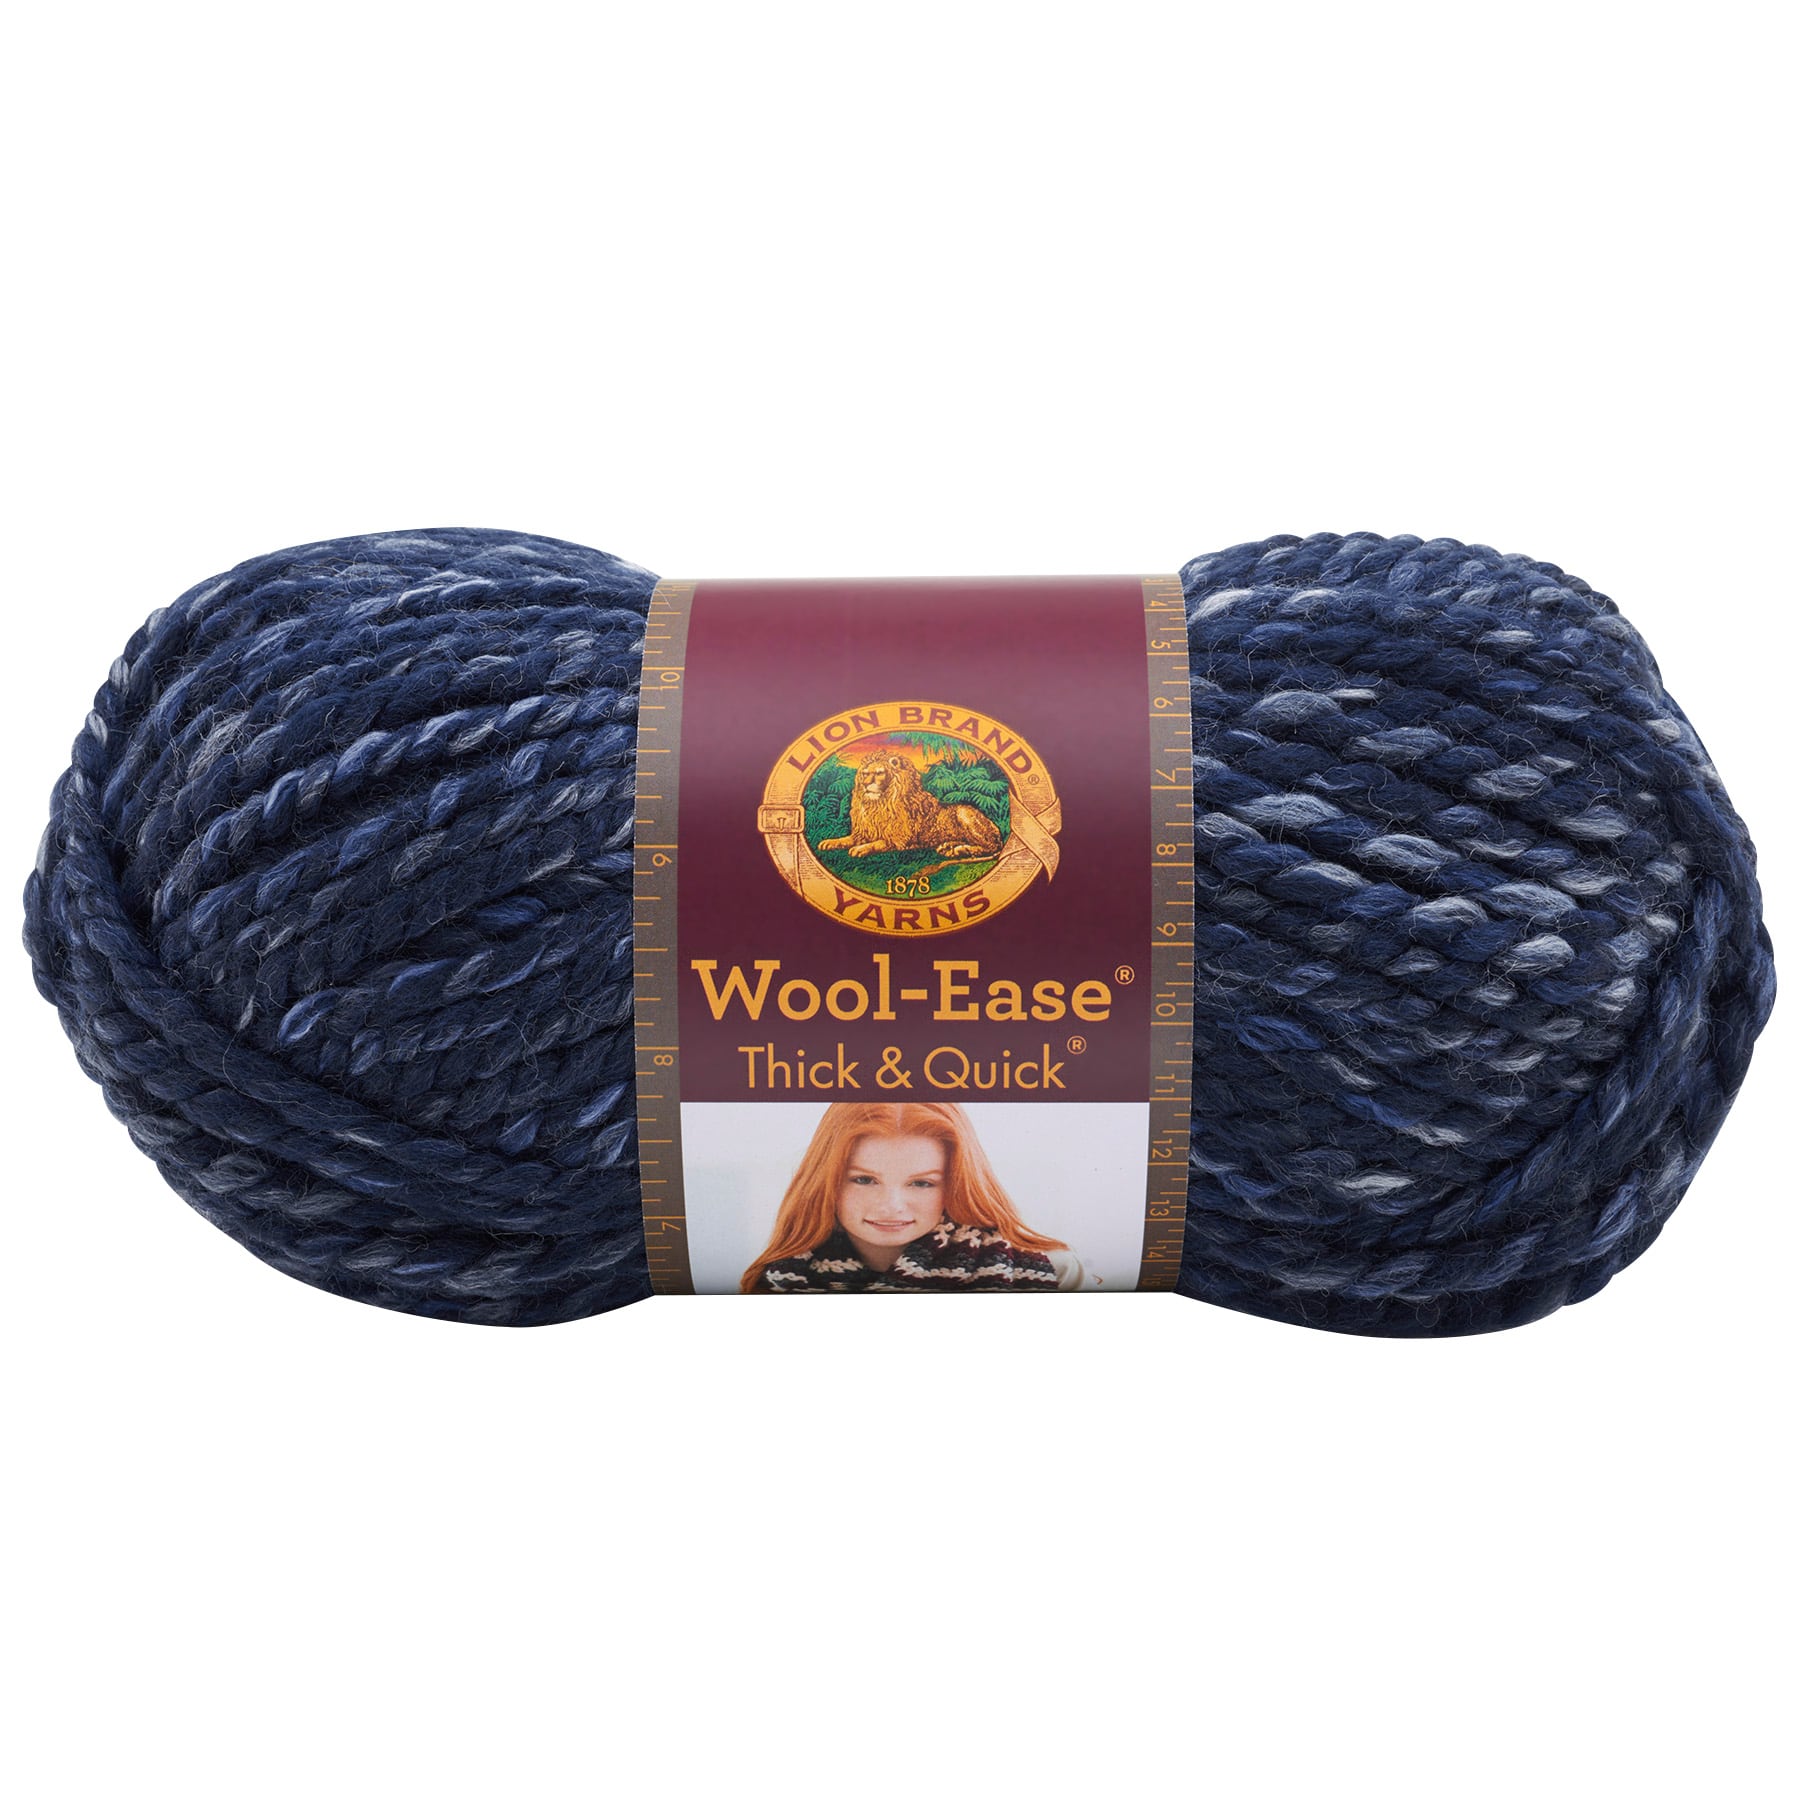 Dream Catcher Lion Brand Wool Ease Thick and Quick Yarn Skein